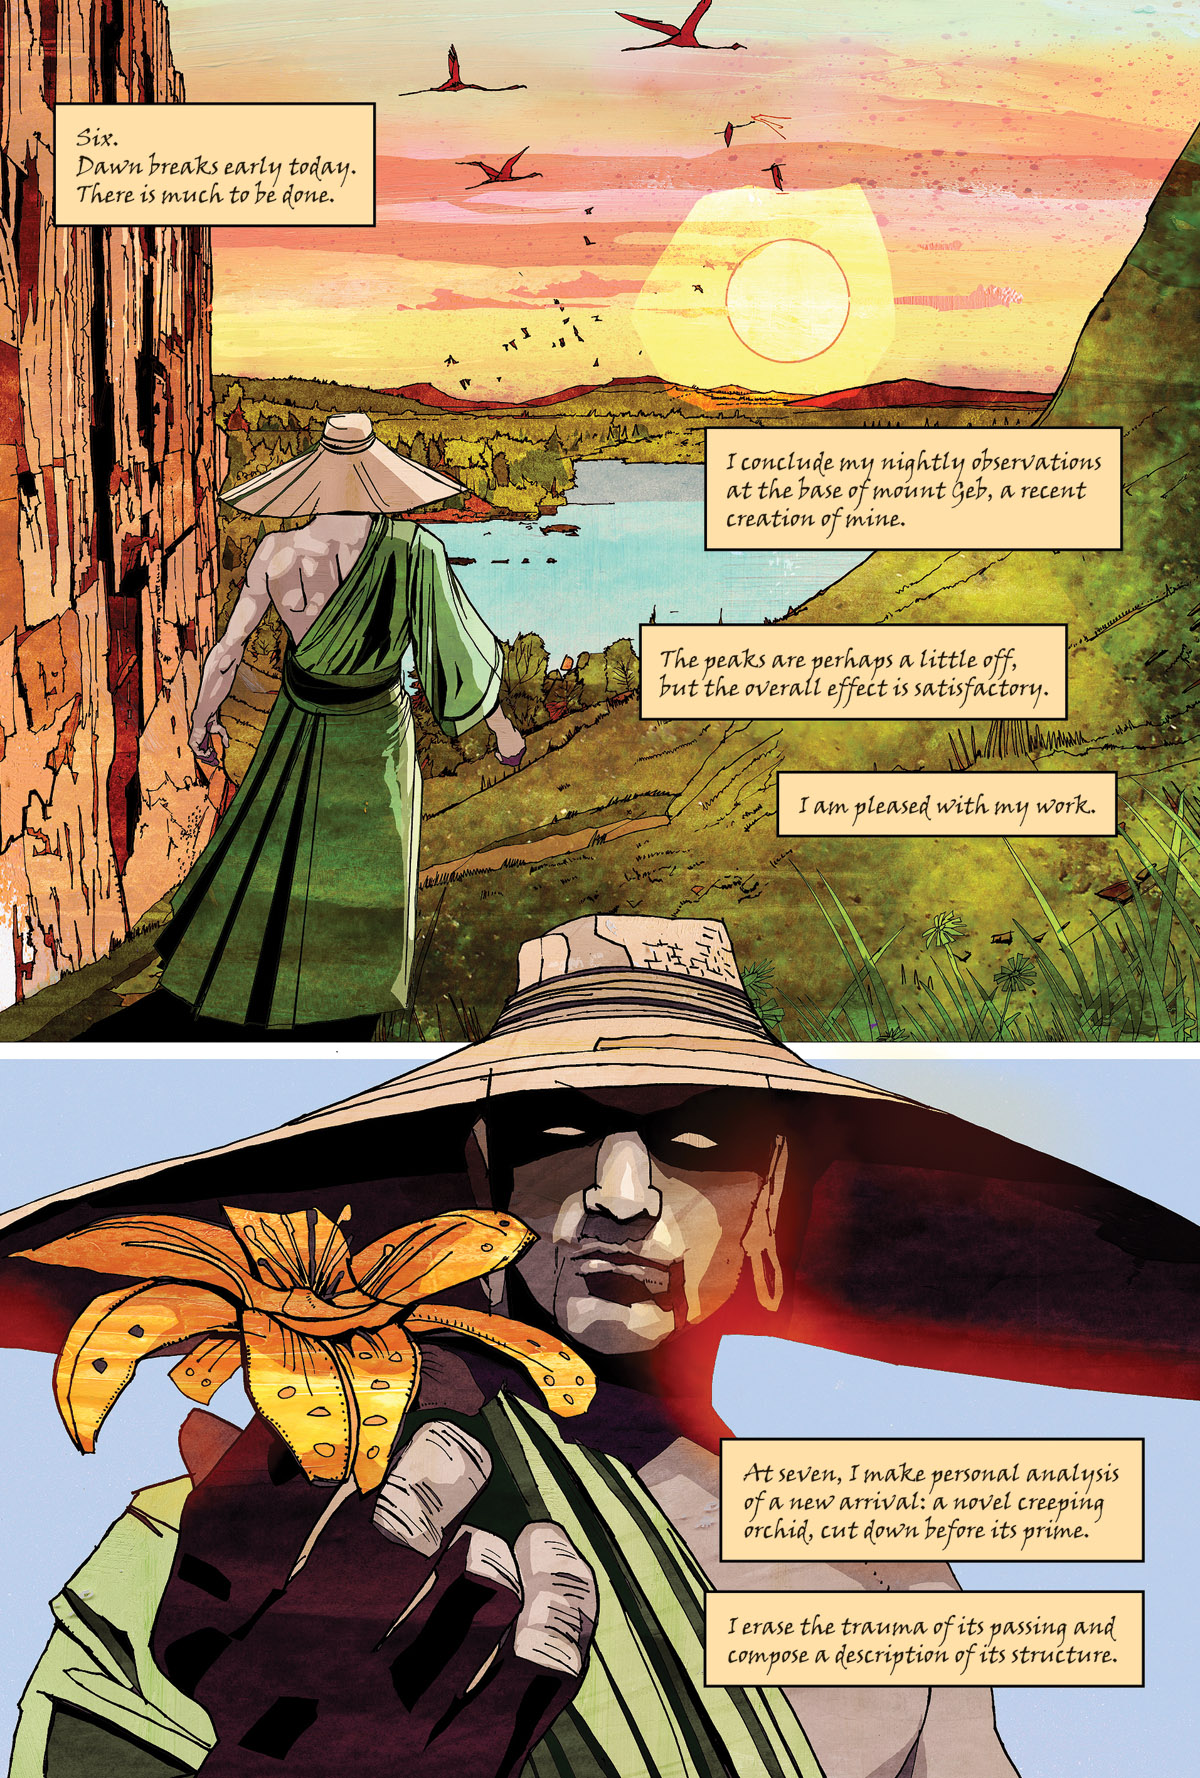 Afterlife Inc. | Dead Days | Anahel | Page 1